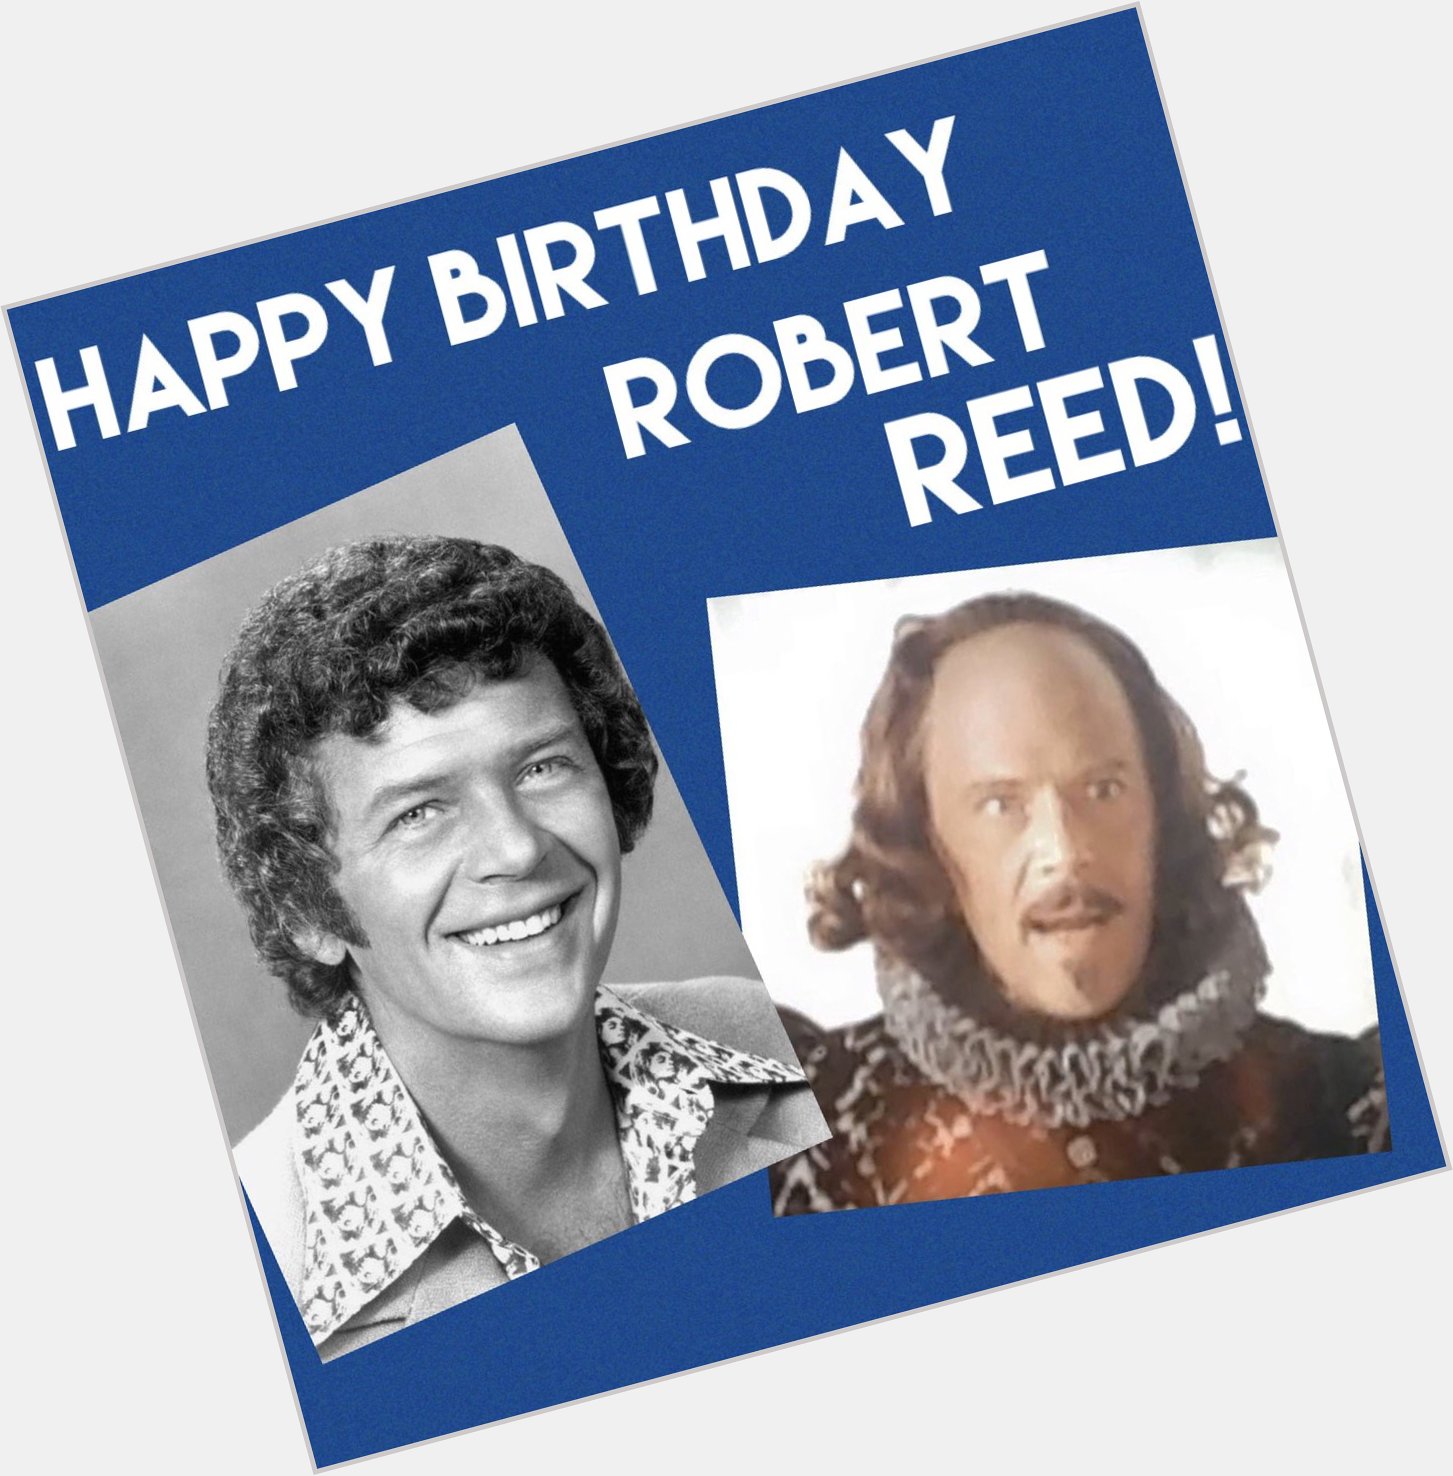 As Mike Brady and as Shakespeare he was nothing short of groovy! Happy 87th birthday, Robert Reed! 